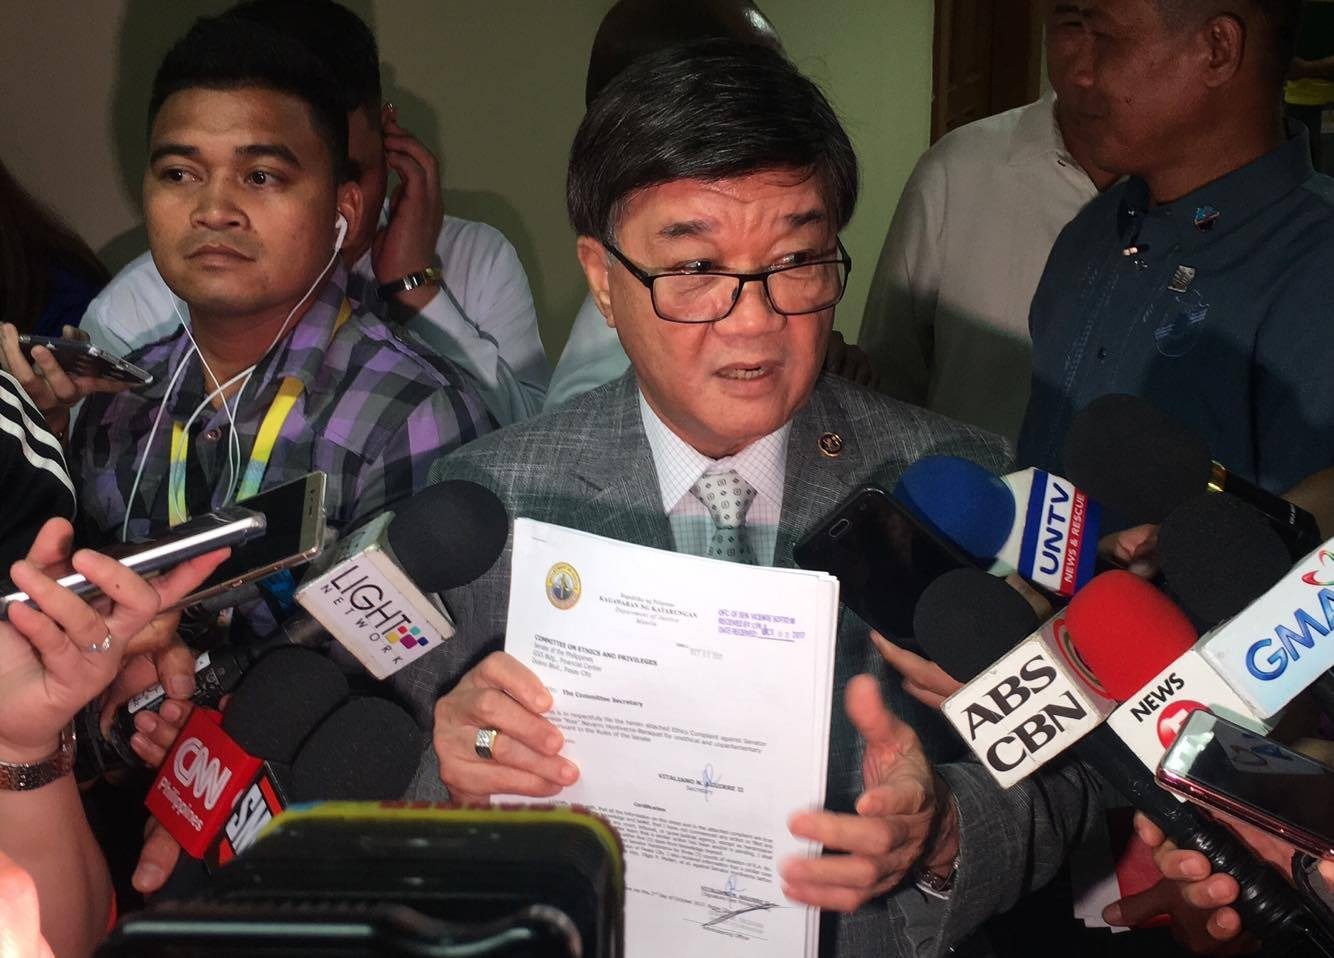 Aguirre wants Hontiveros suspended or expelled over alleged wiretapping